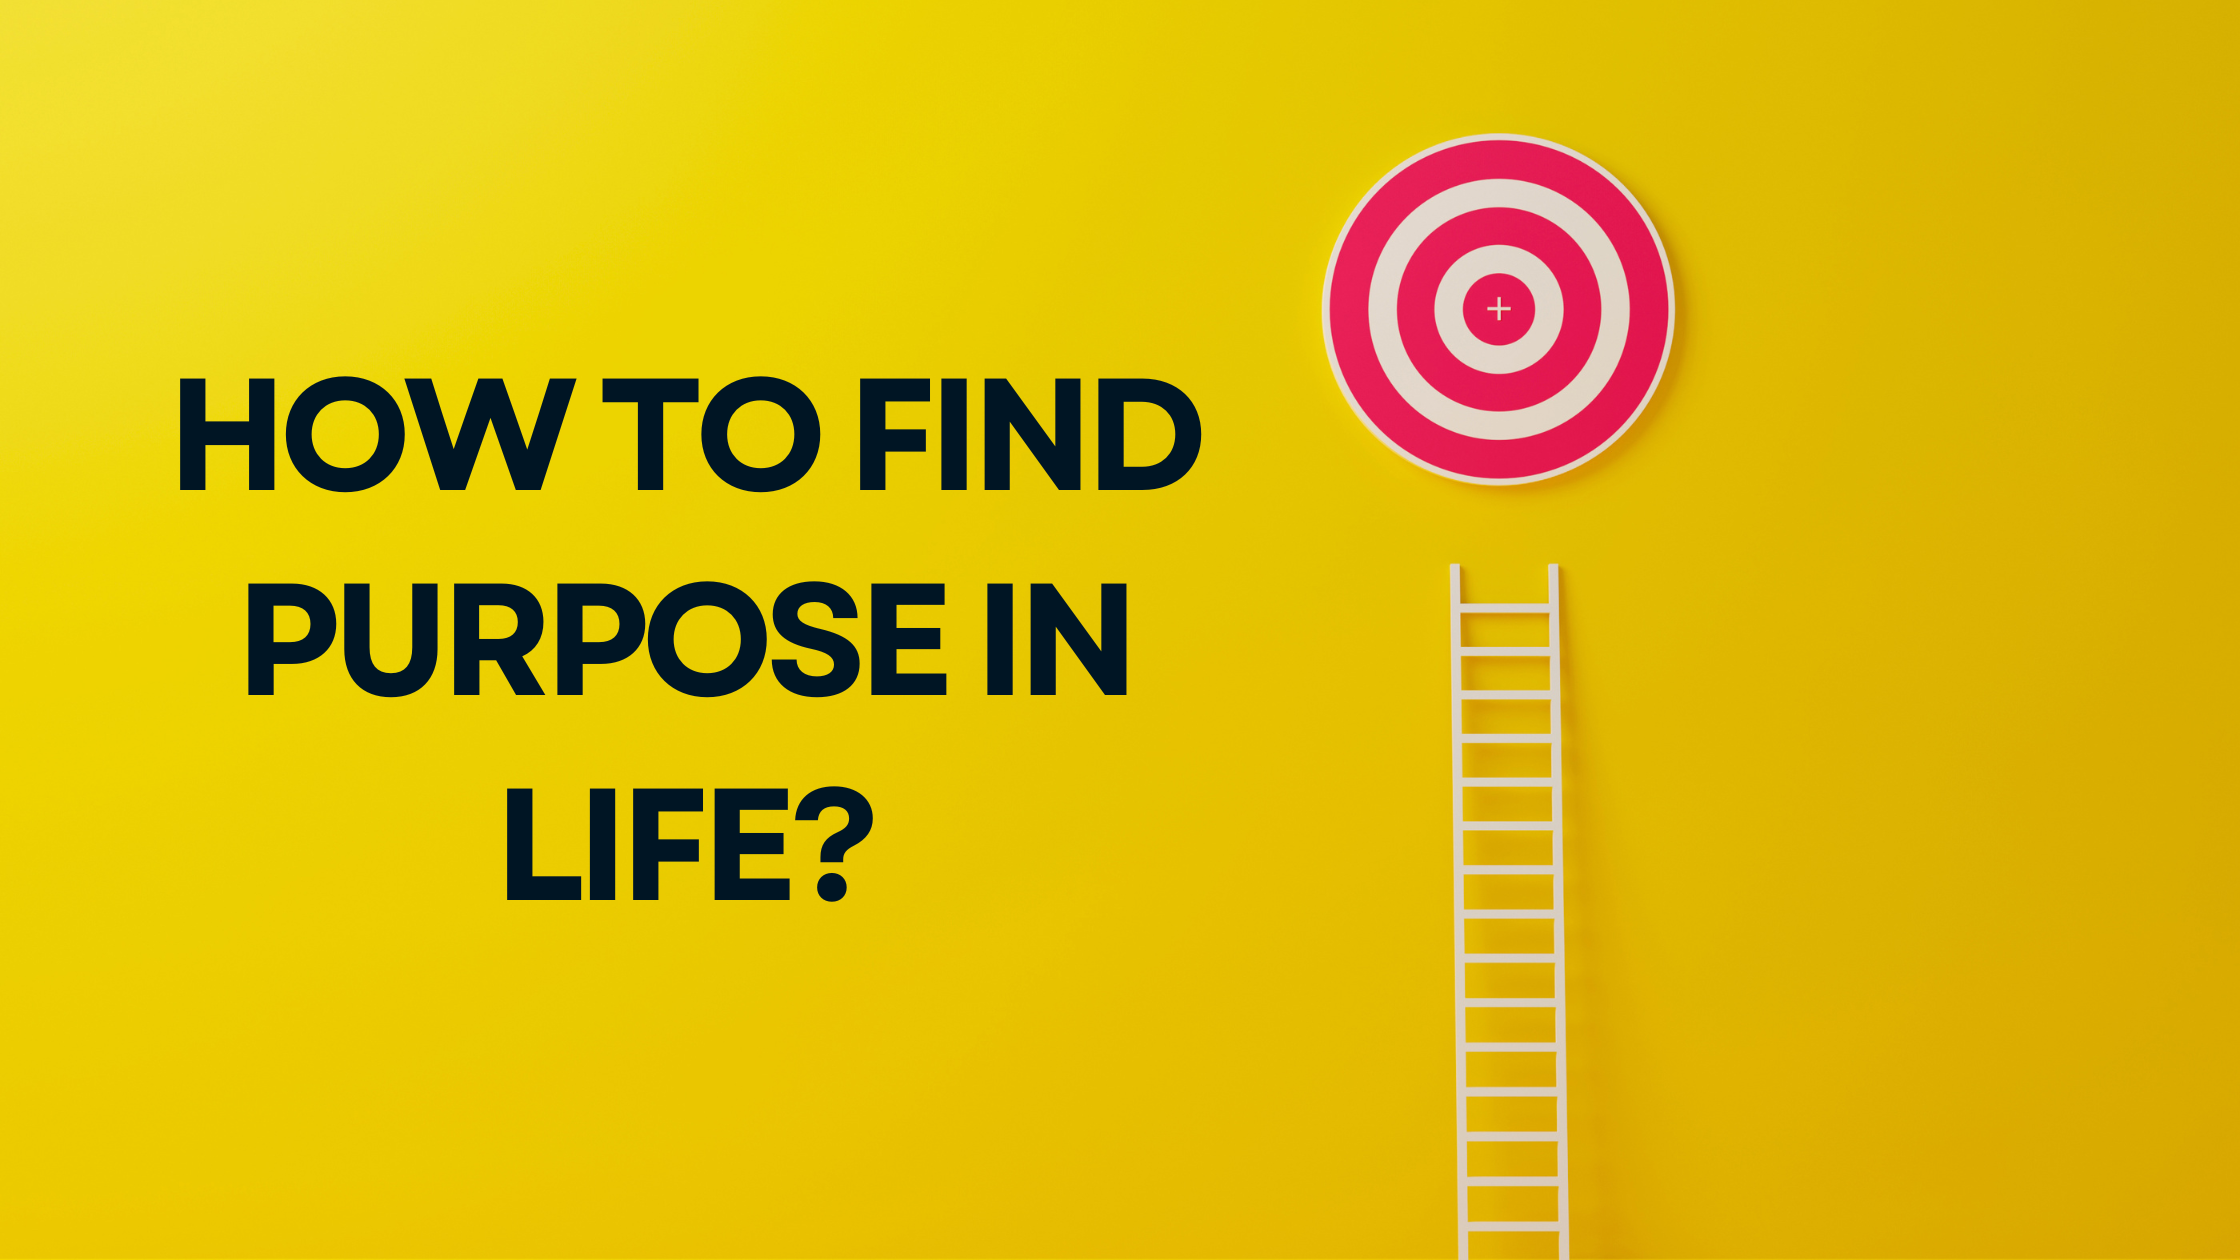 How to Find Purpose in Life